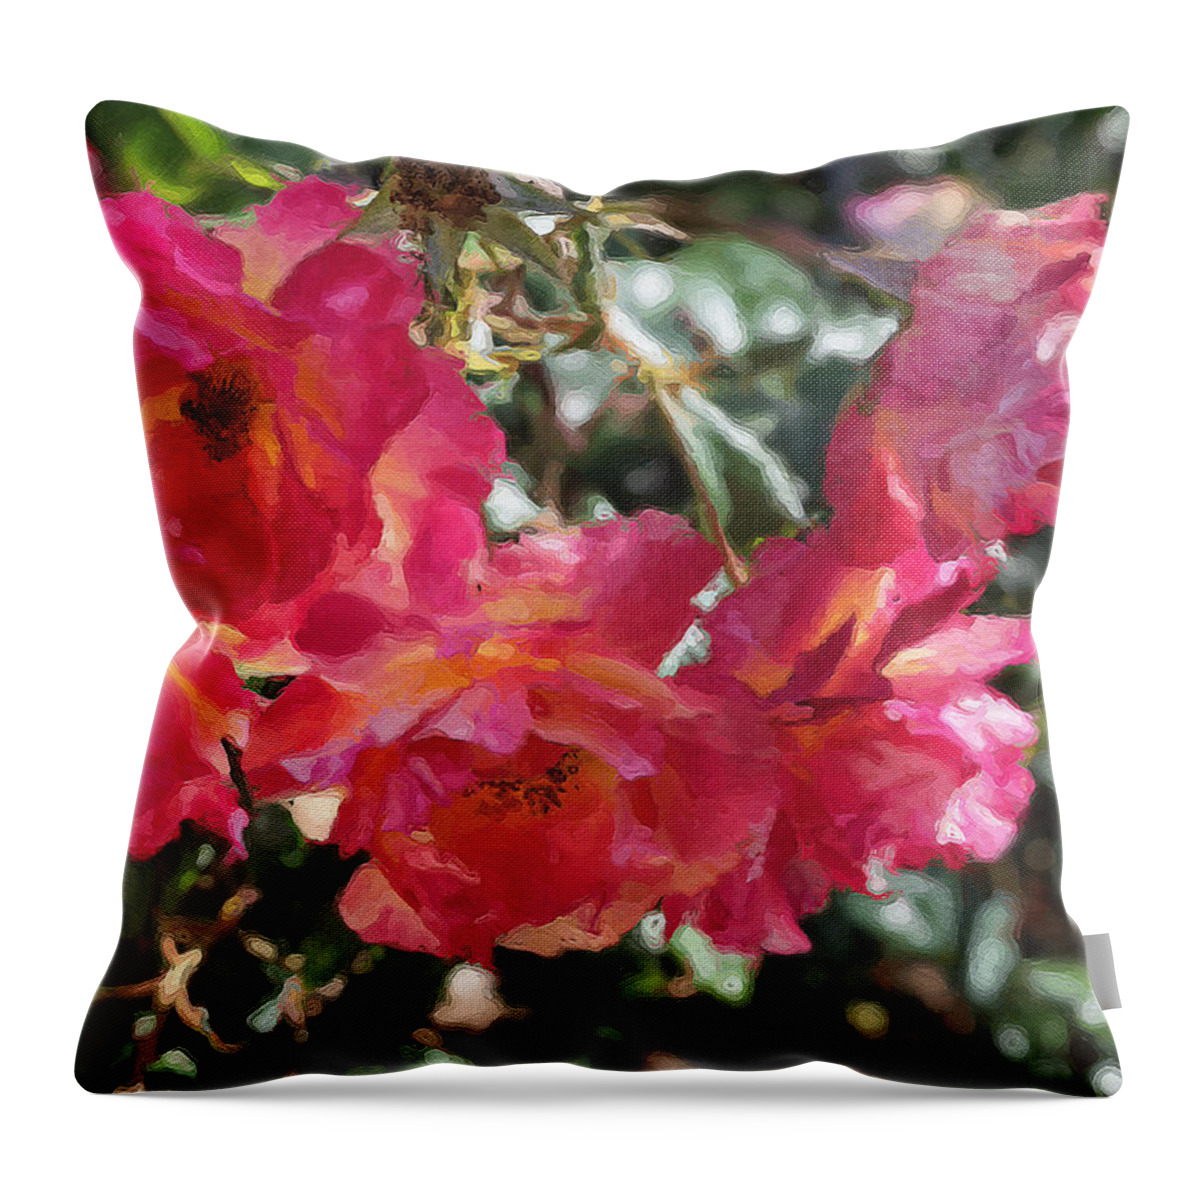 Roses Throw Pillow featuring the photograph Disney Roses Three by Brian Watt